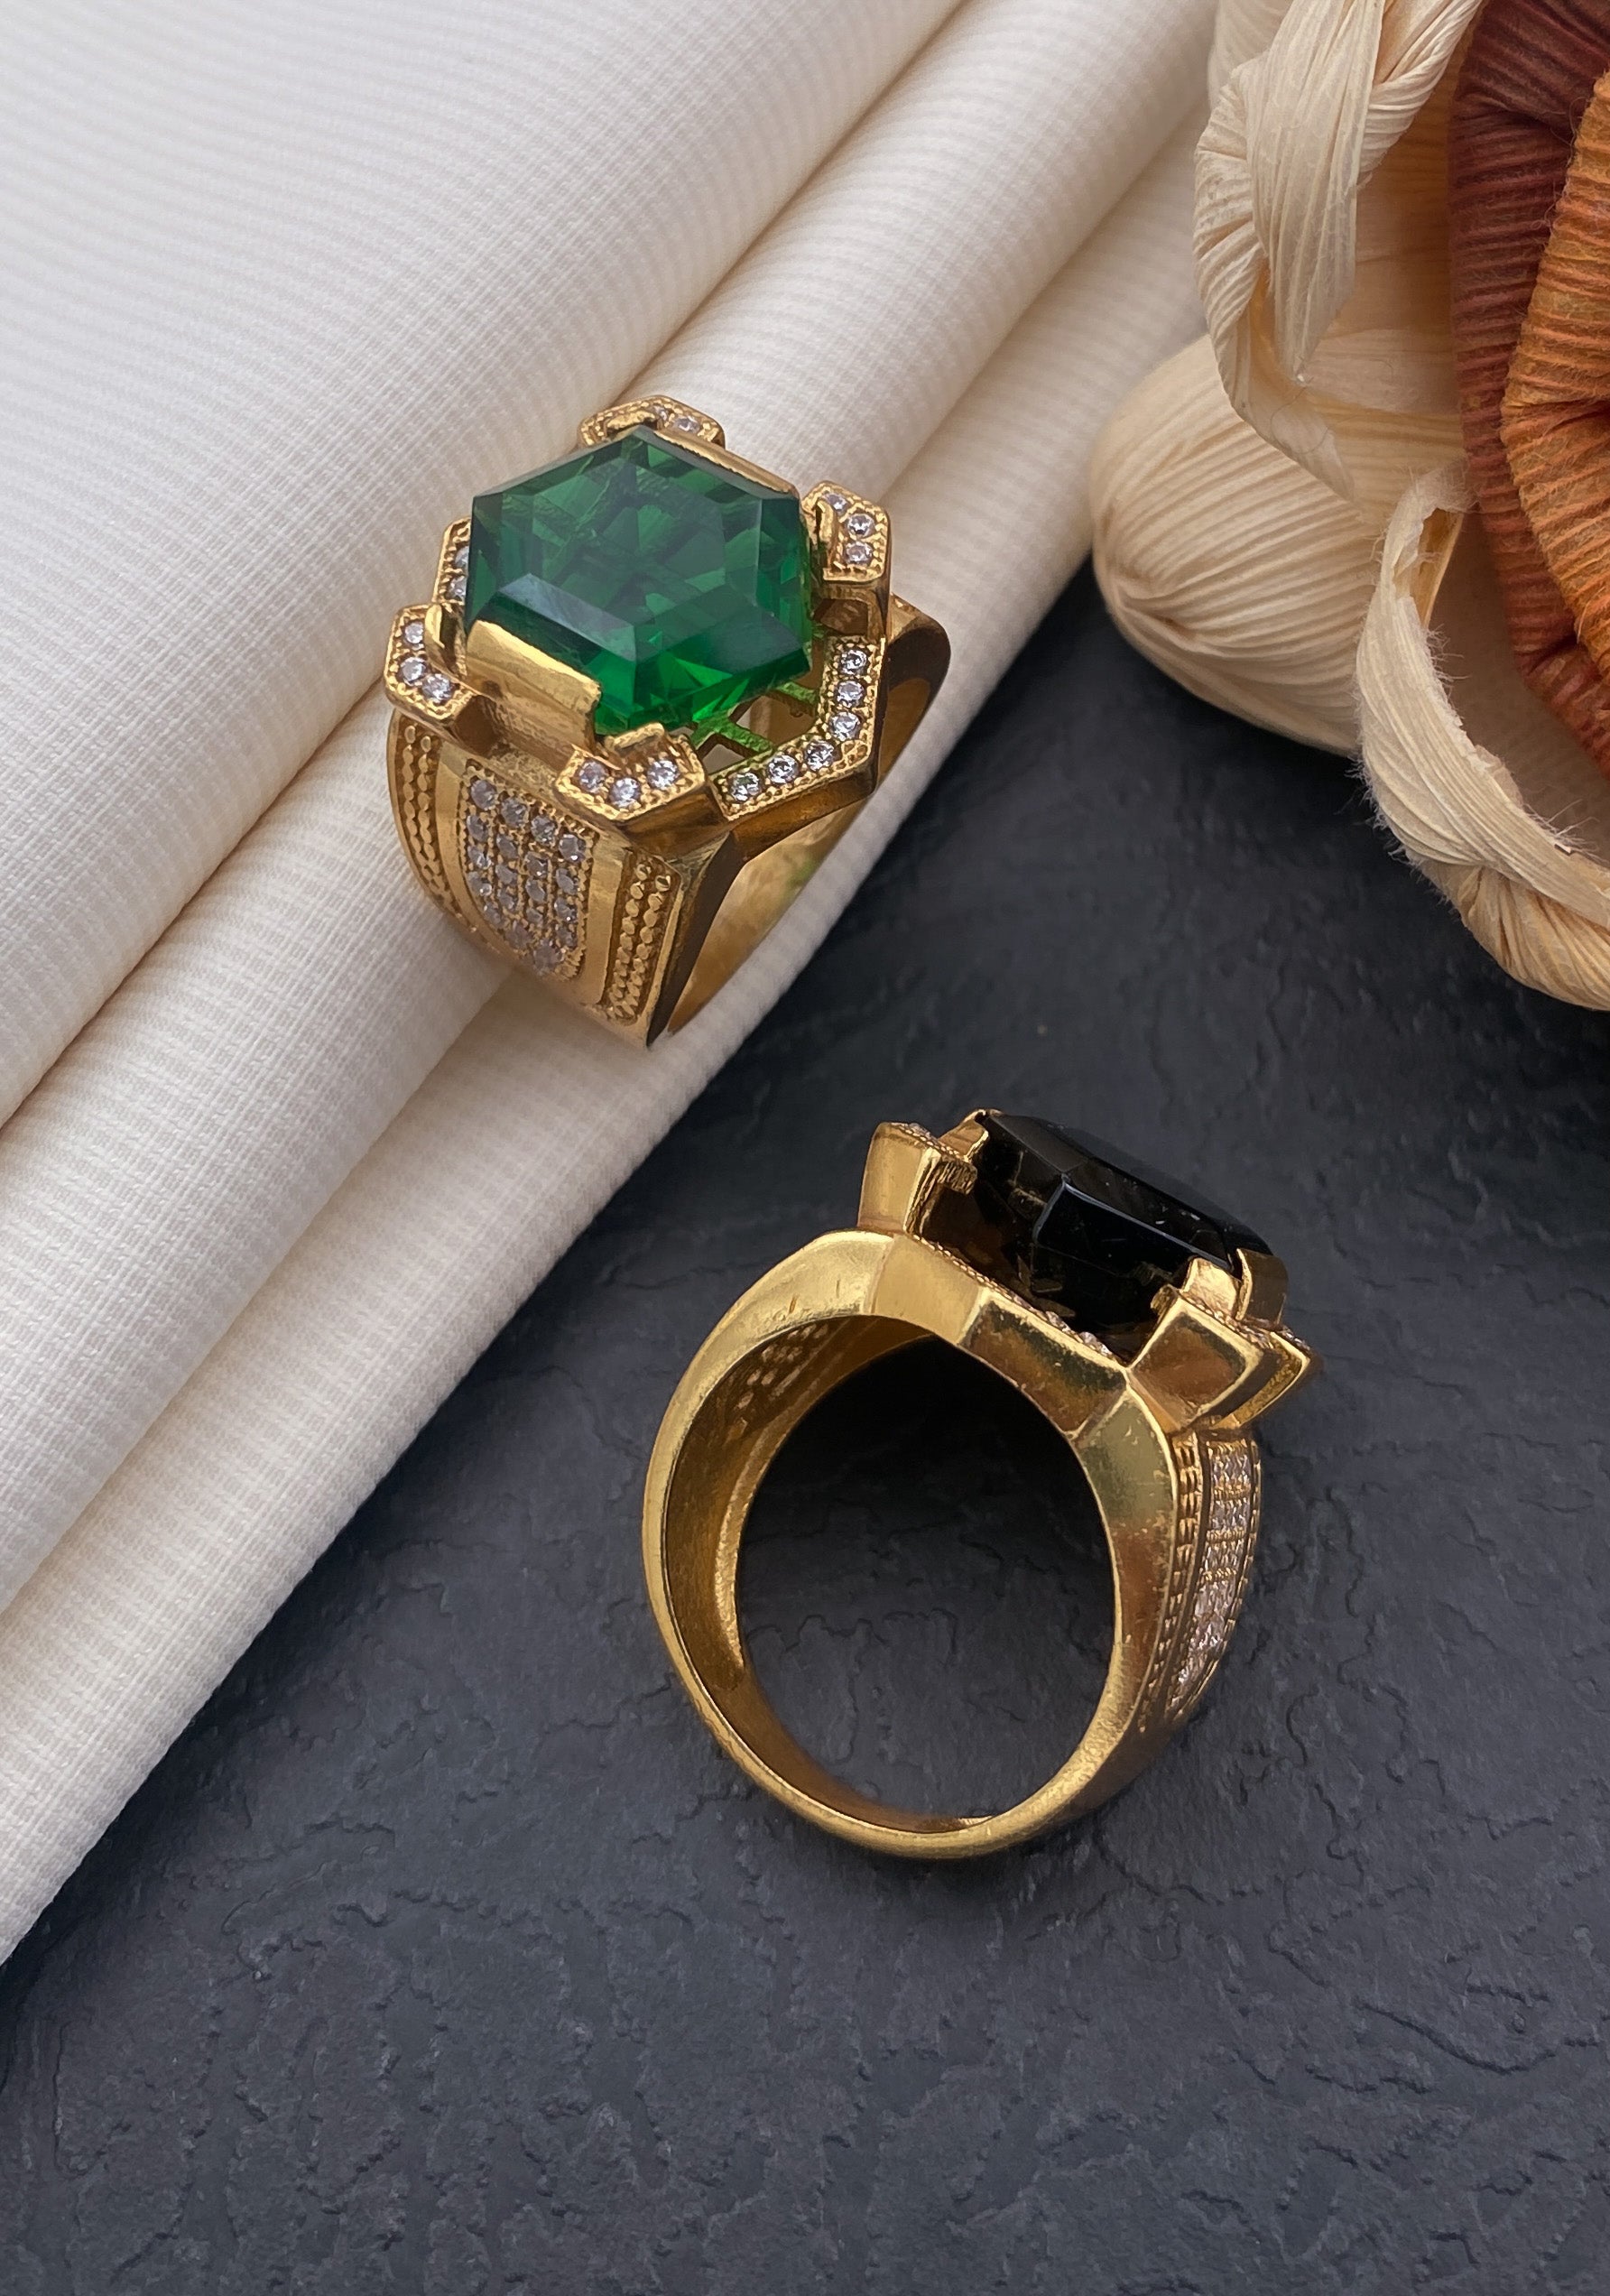 Premium Photo | A green diamond ring with a green stone sits on a black  surface